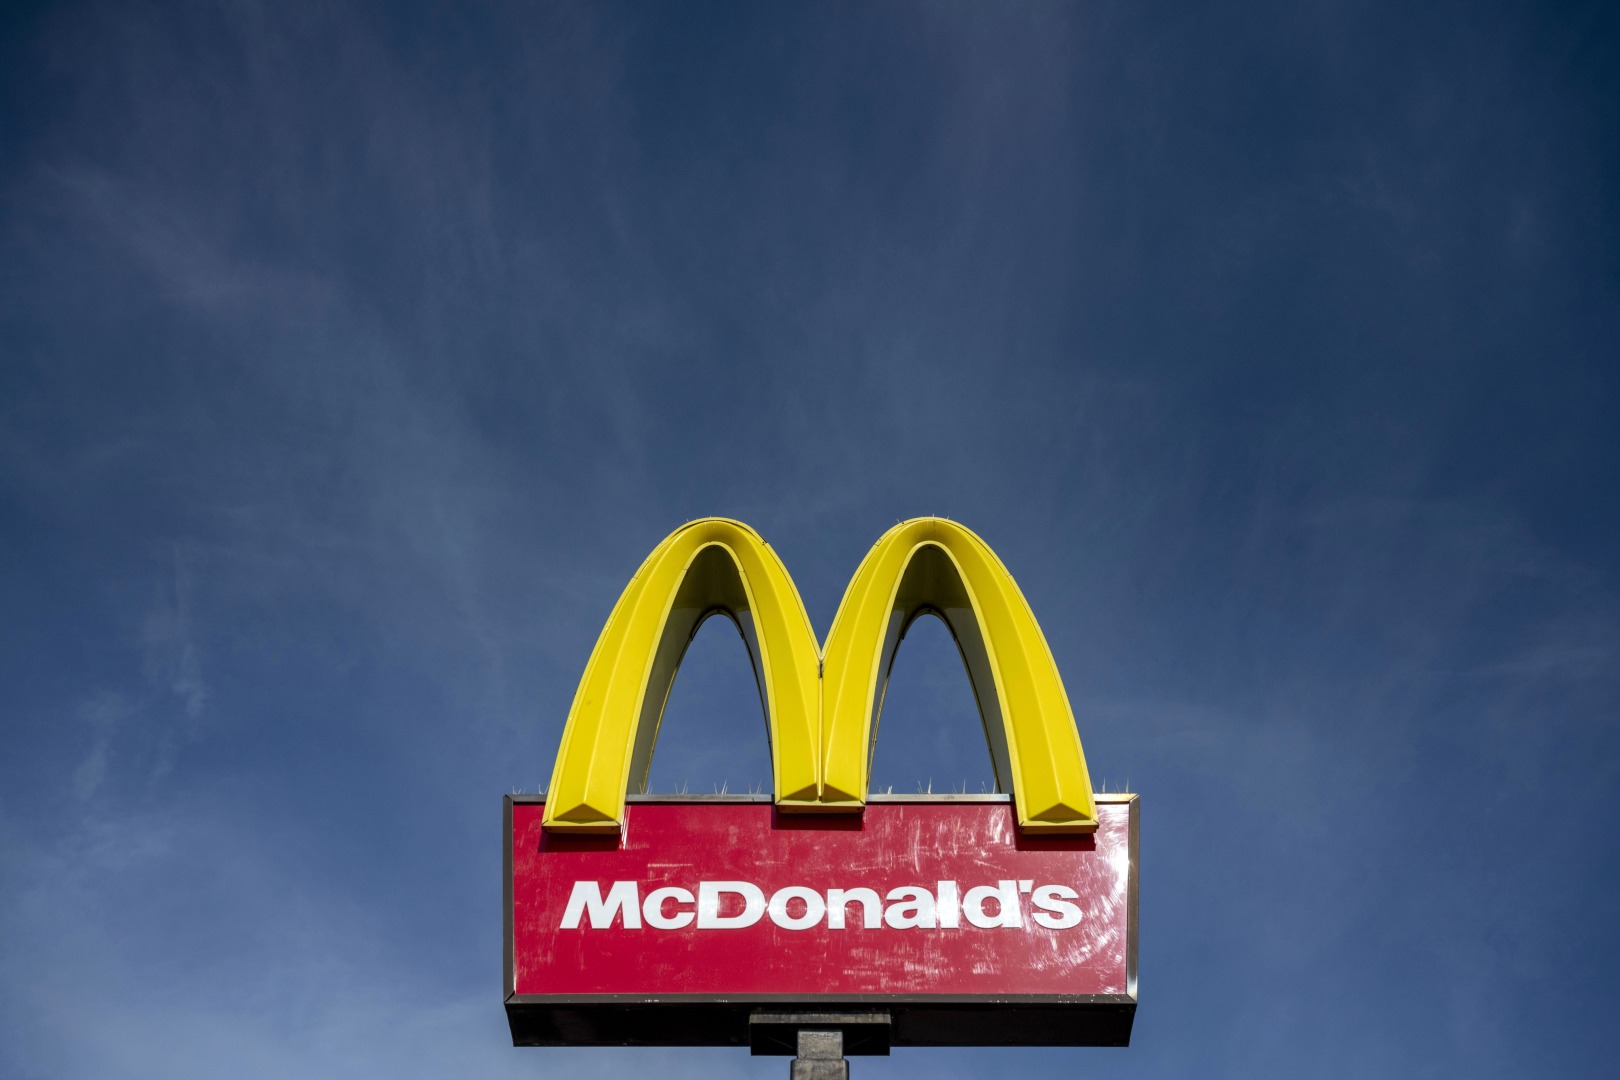 McDonalds_Aims_to_Reduce_Greenhouse_Gas_Emissions.jpg